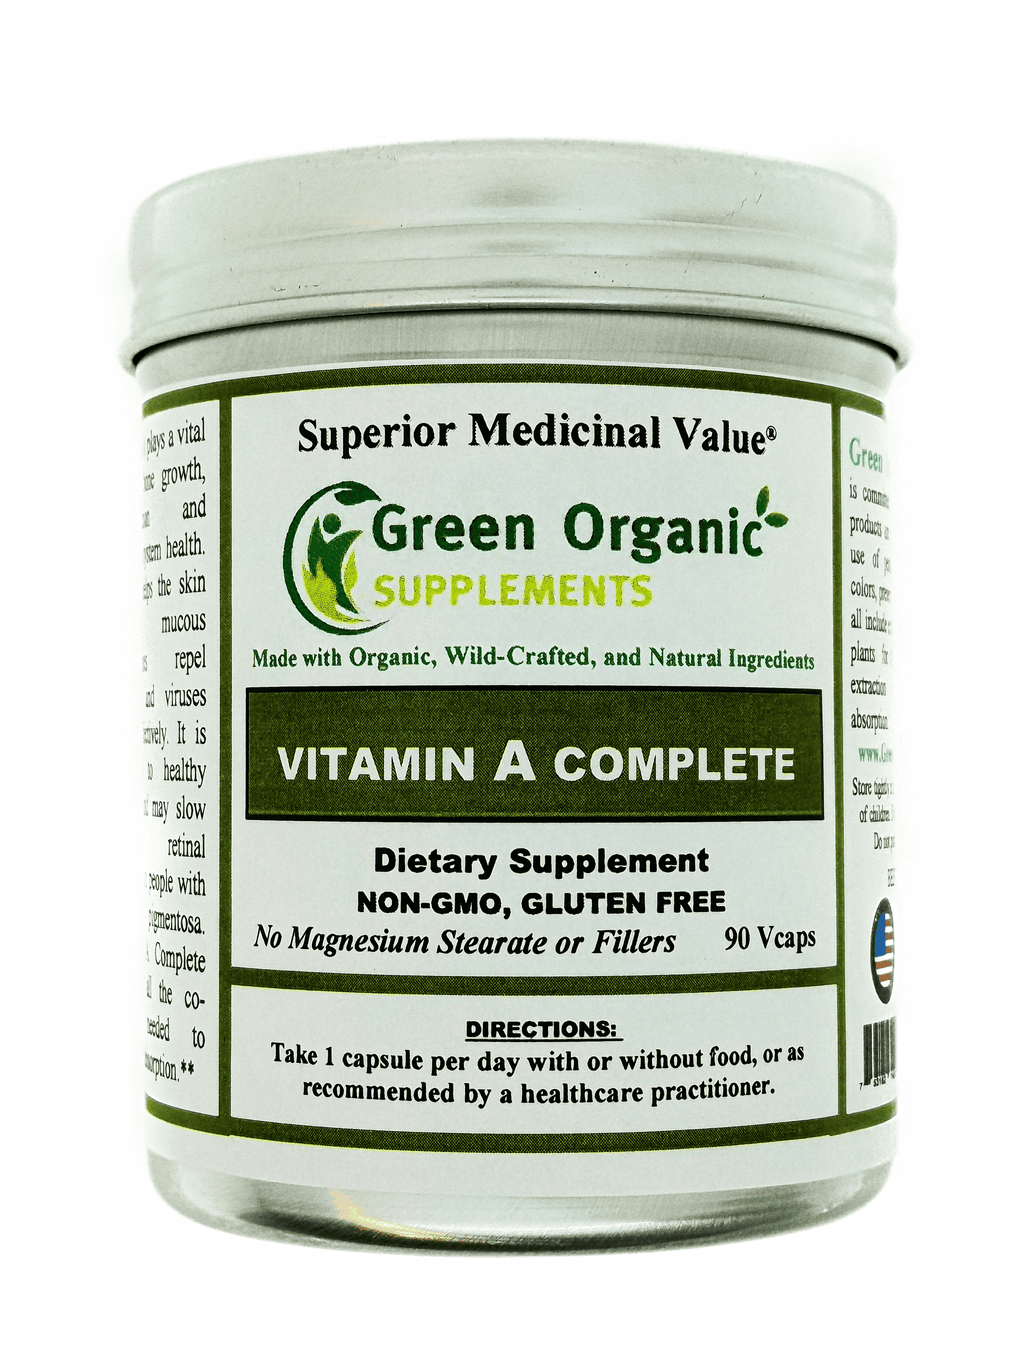 Buy organic supplements for women - Vitamin A complete